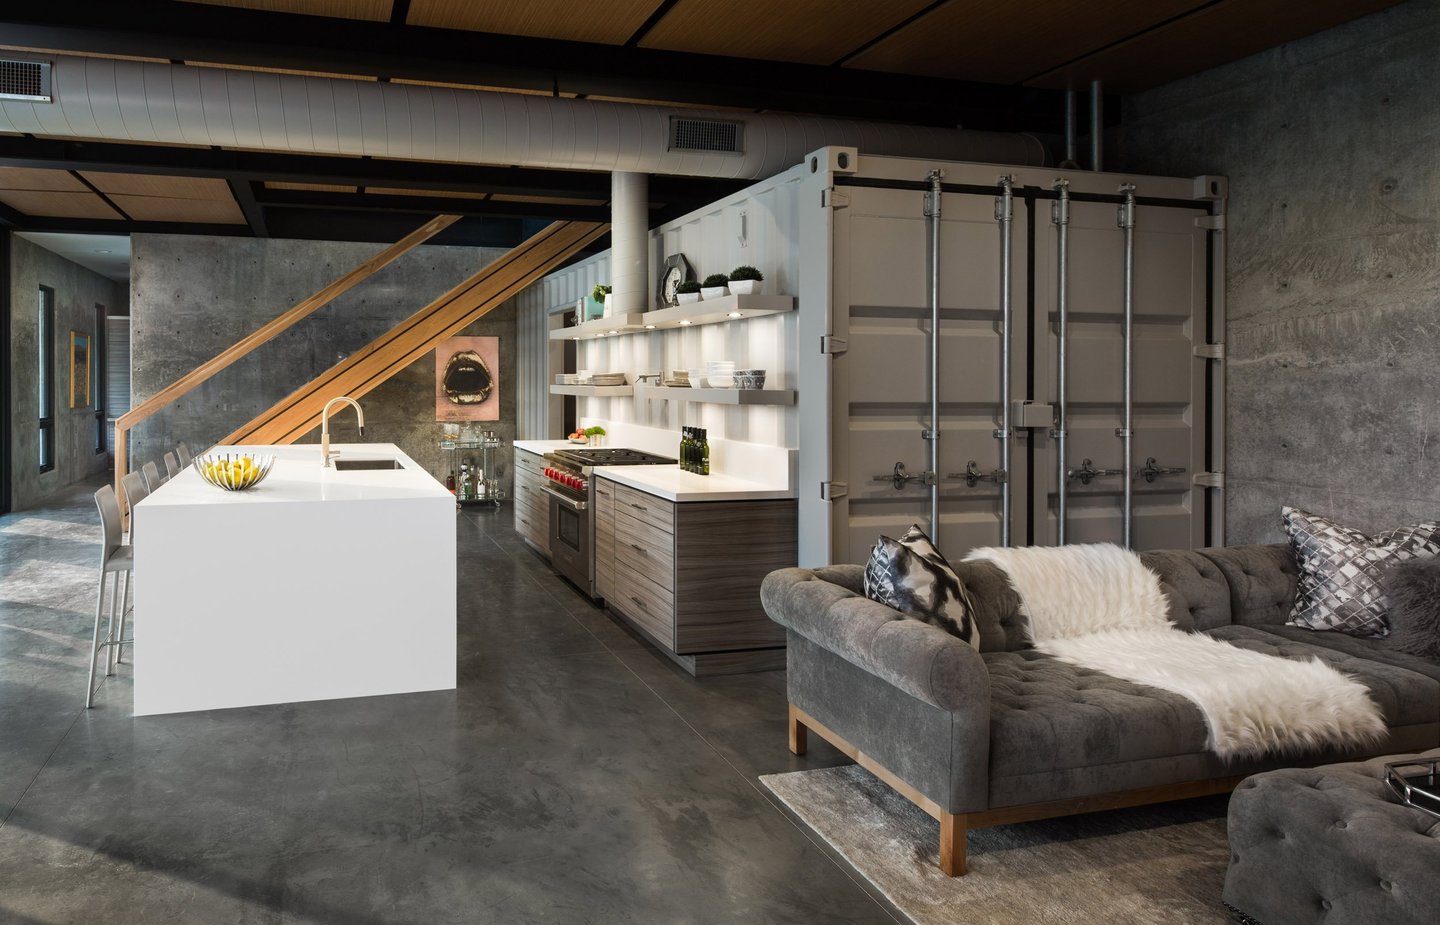 Shipping Container Residence-3-living room with shipping container scullery